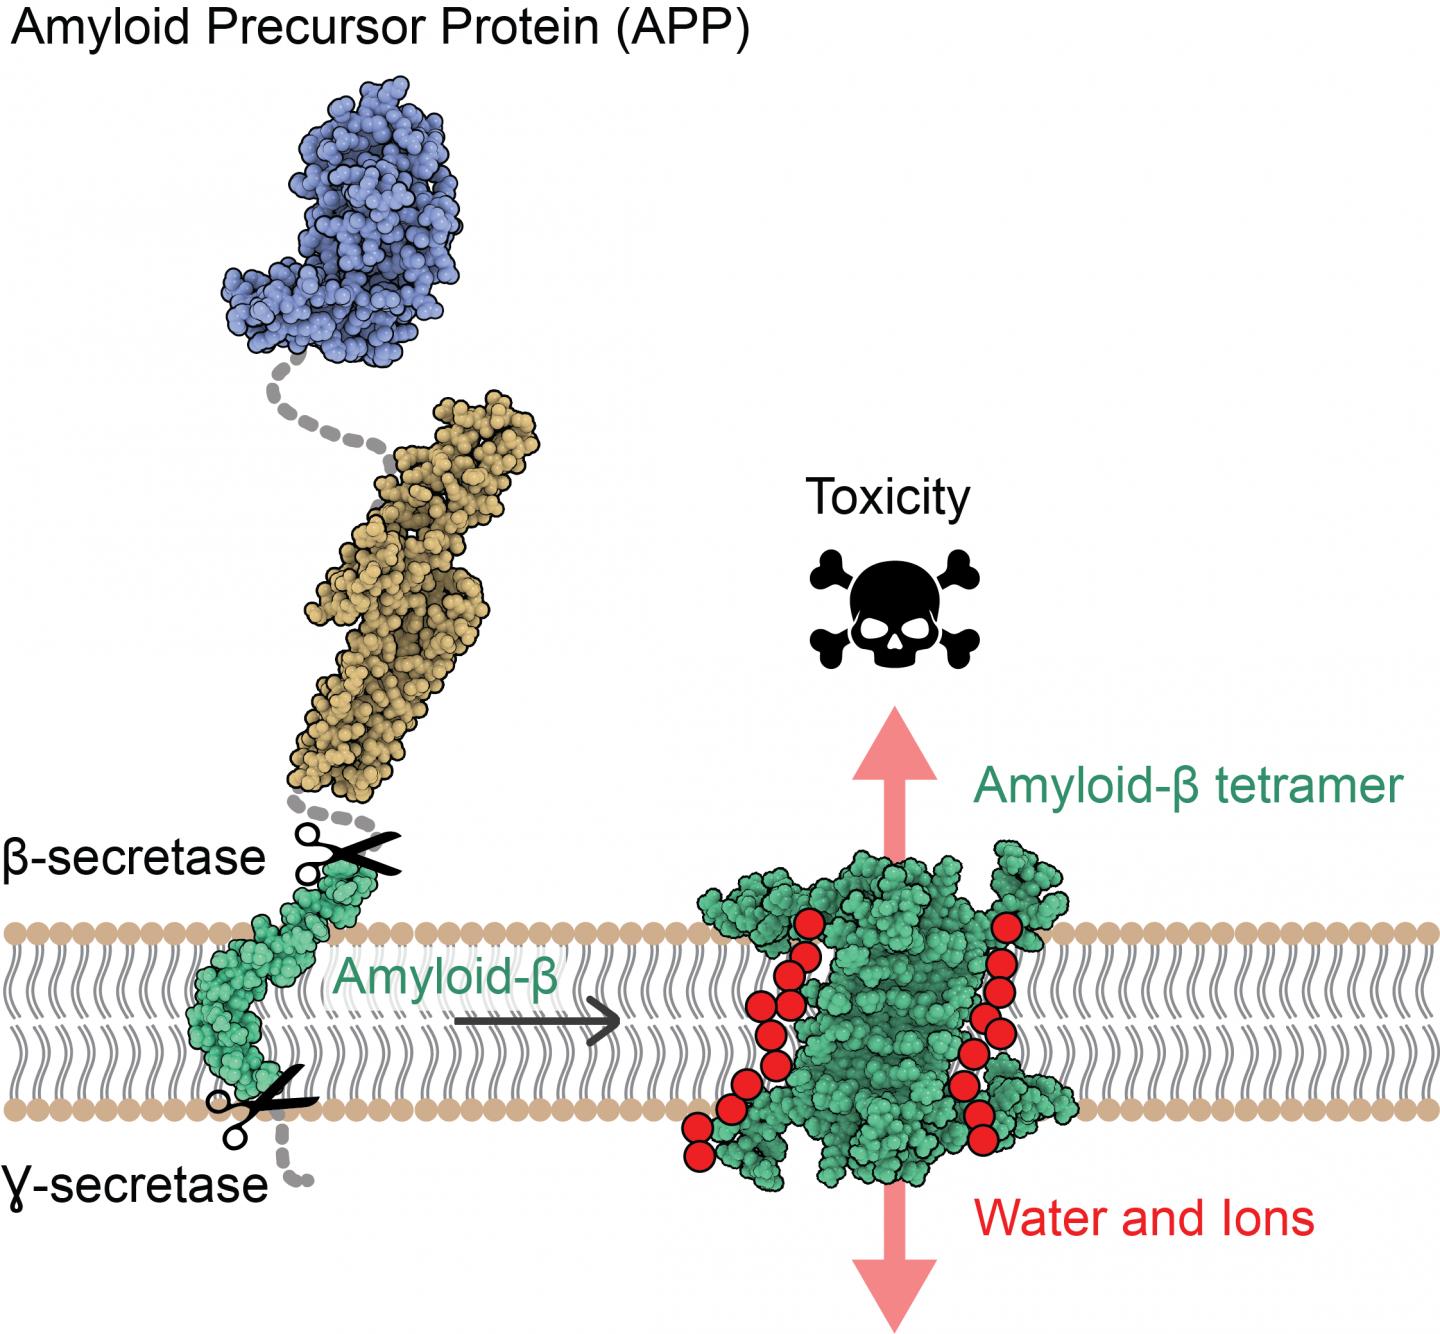 AB protein self-assembles into 4 or 8 copies adopting an arrangement allowing passage of water and ions (in red)